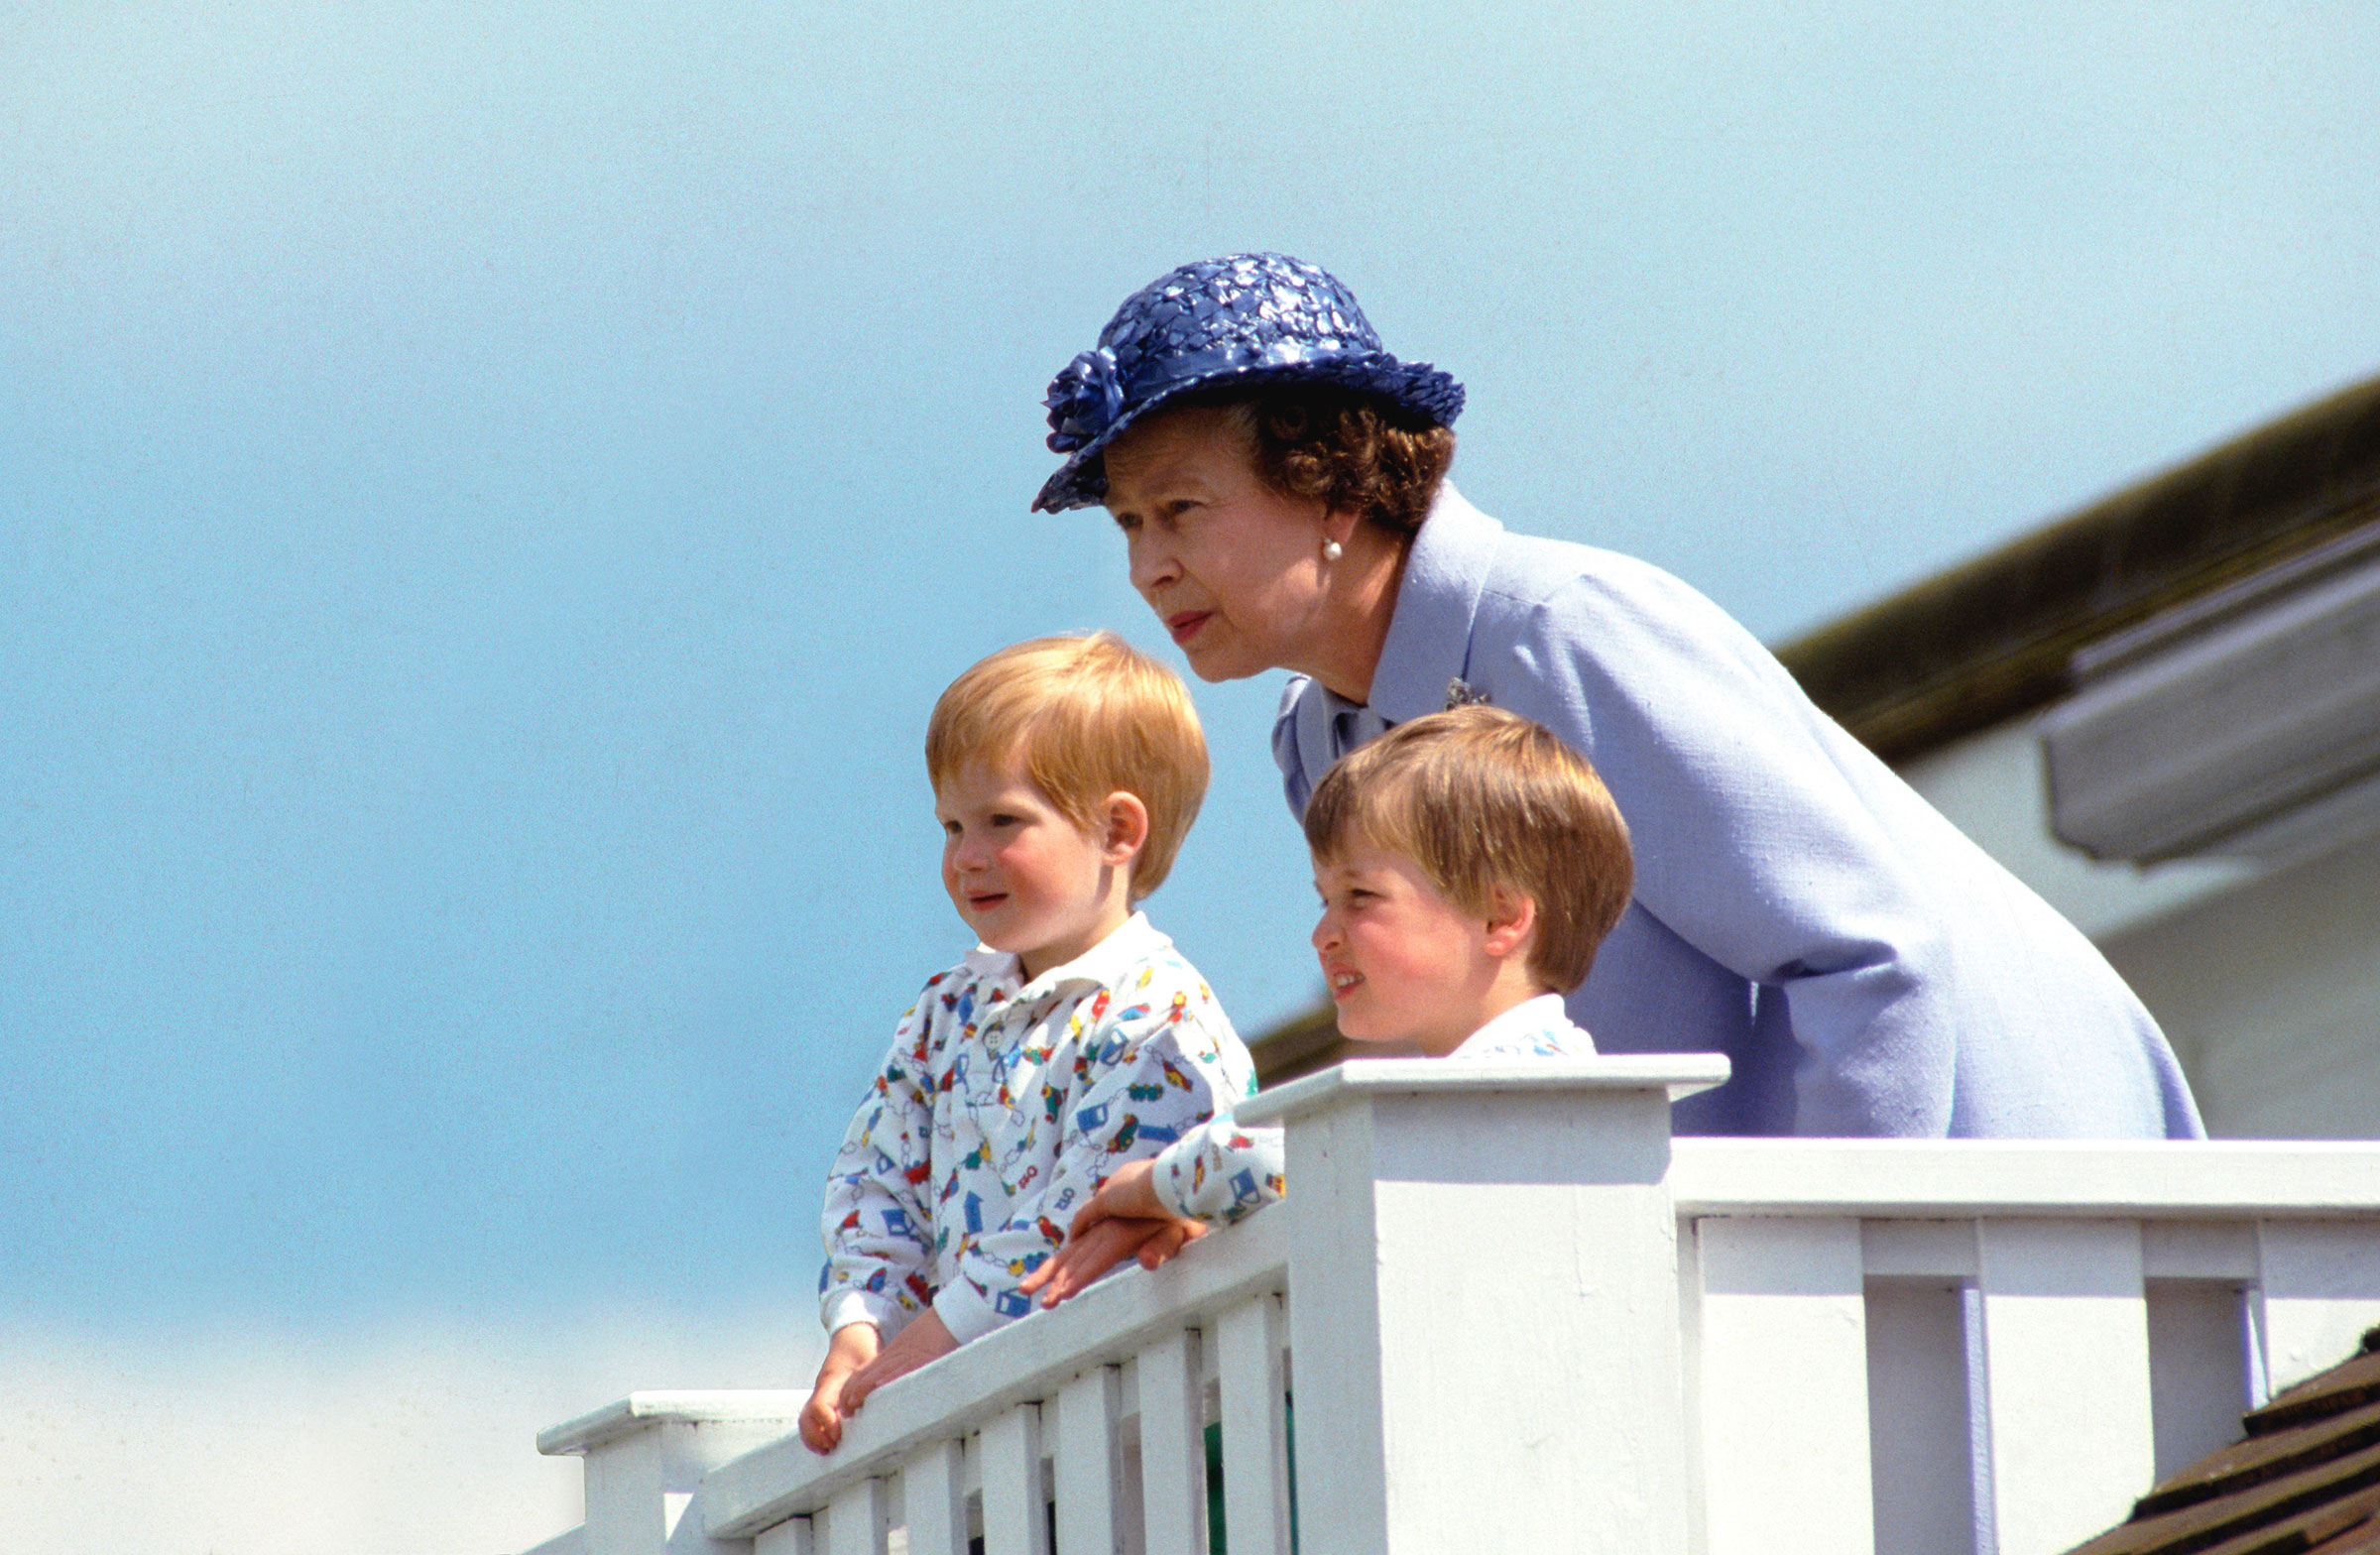 The Queen With Prince William And Prince Harry In The Royal Box At Guards Polo Club, Smiths Lawn, Windsor ca. 1987. (Tim Graham Photo Library/Getty Images)